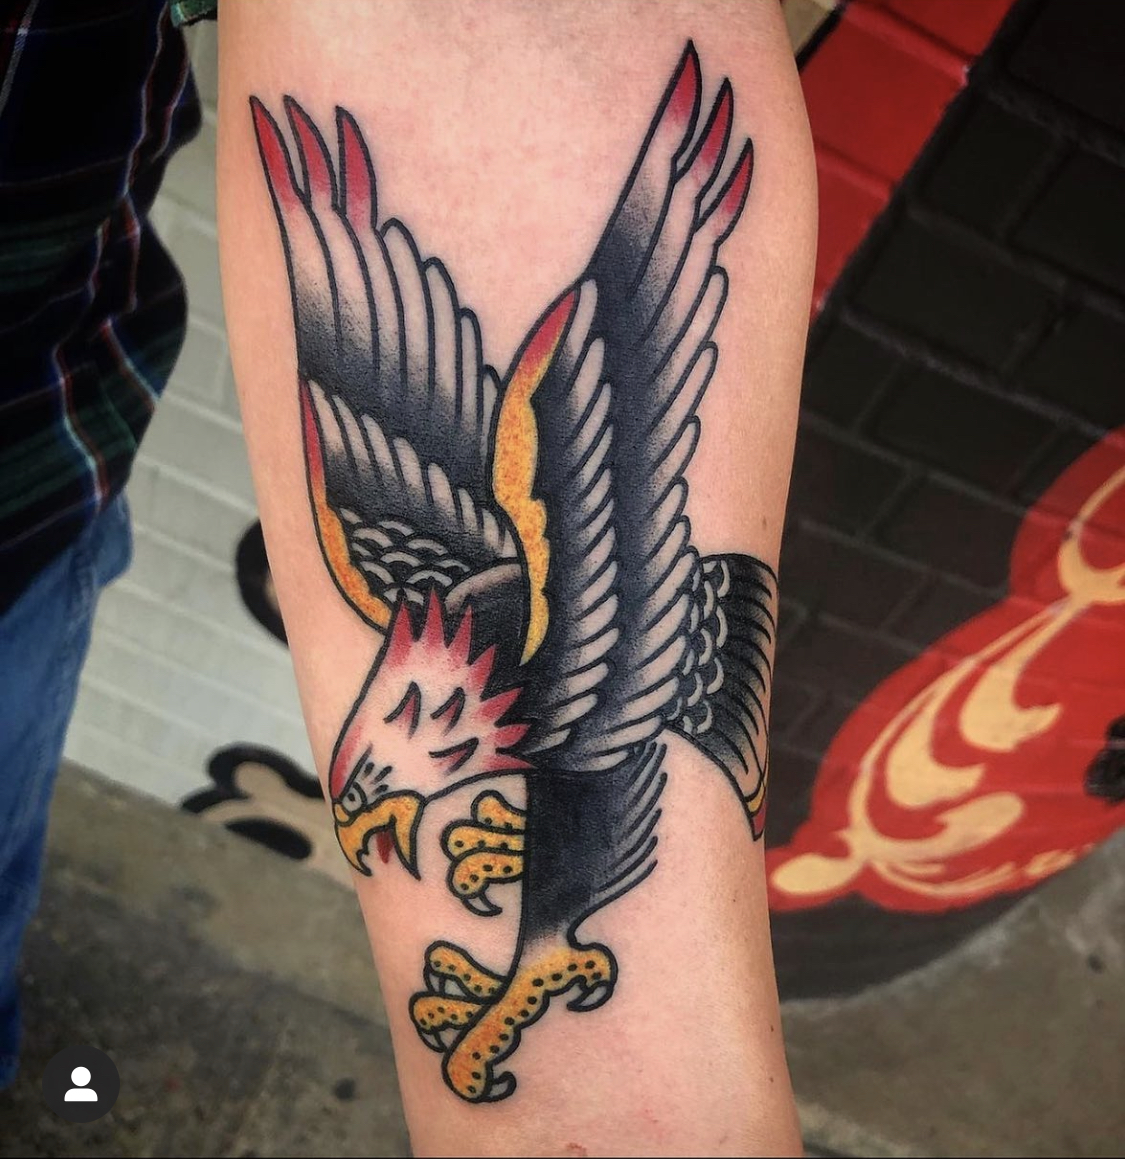 Tattoo of a flying eagle from Dallas tattoo shop